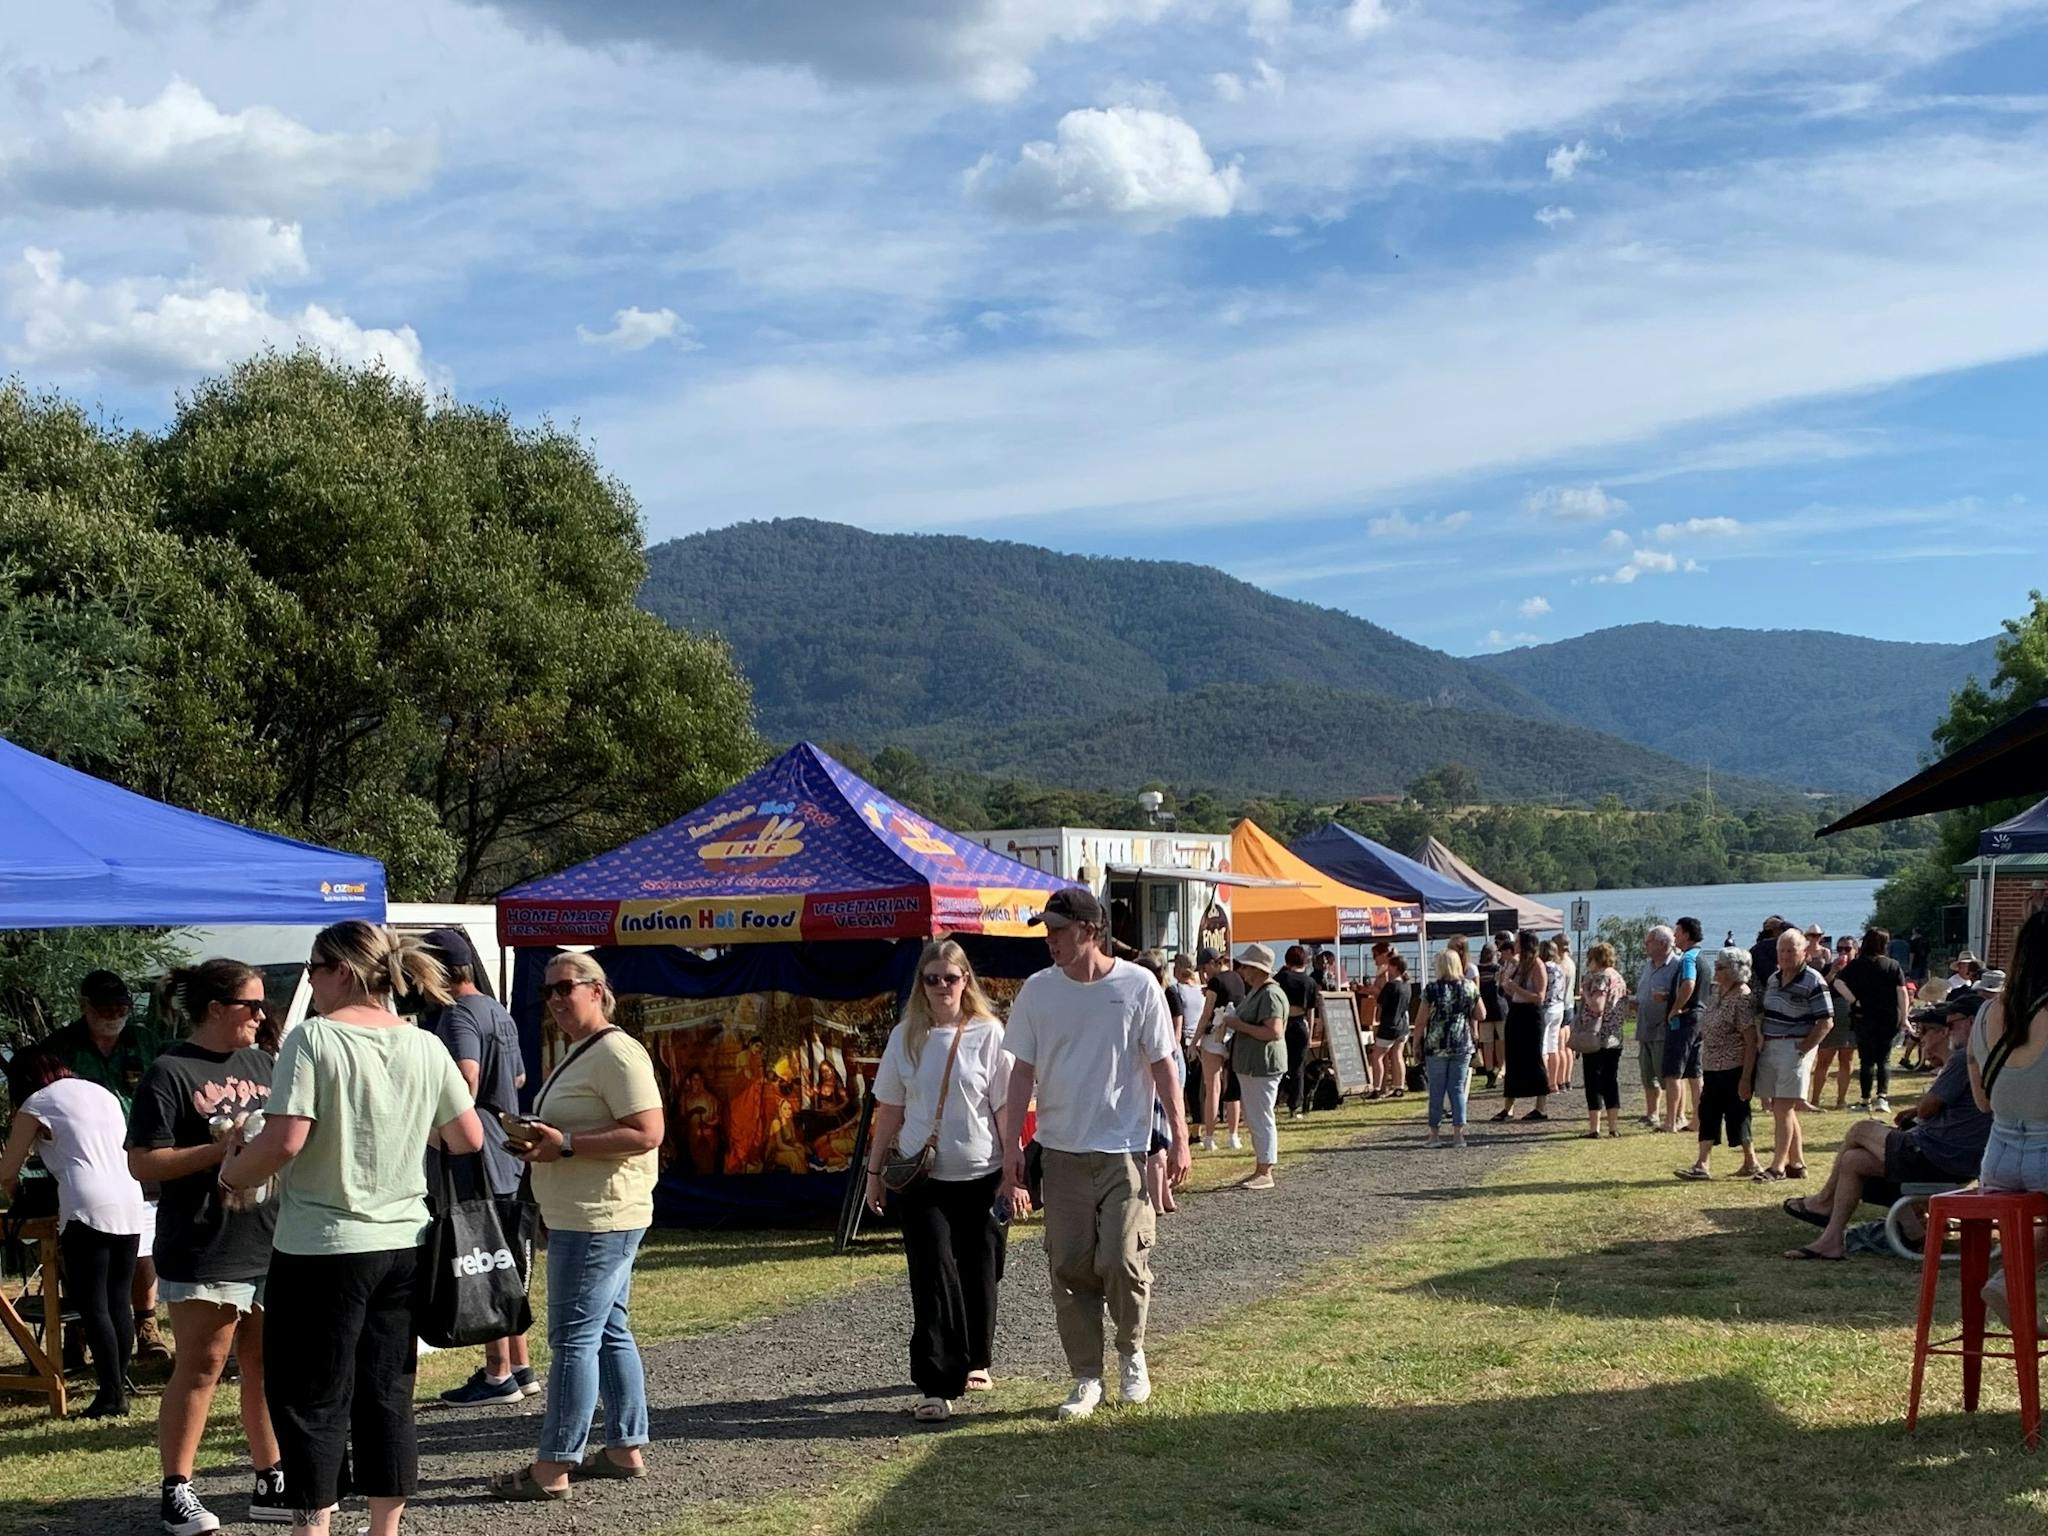 Local Food, wine, boutique beer, produce, live music, fantastic location - come and enjoy .